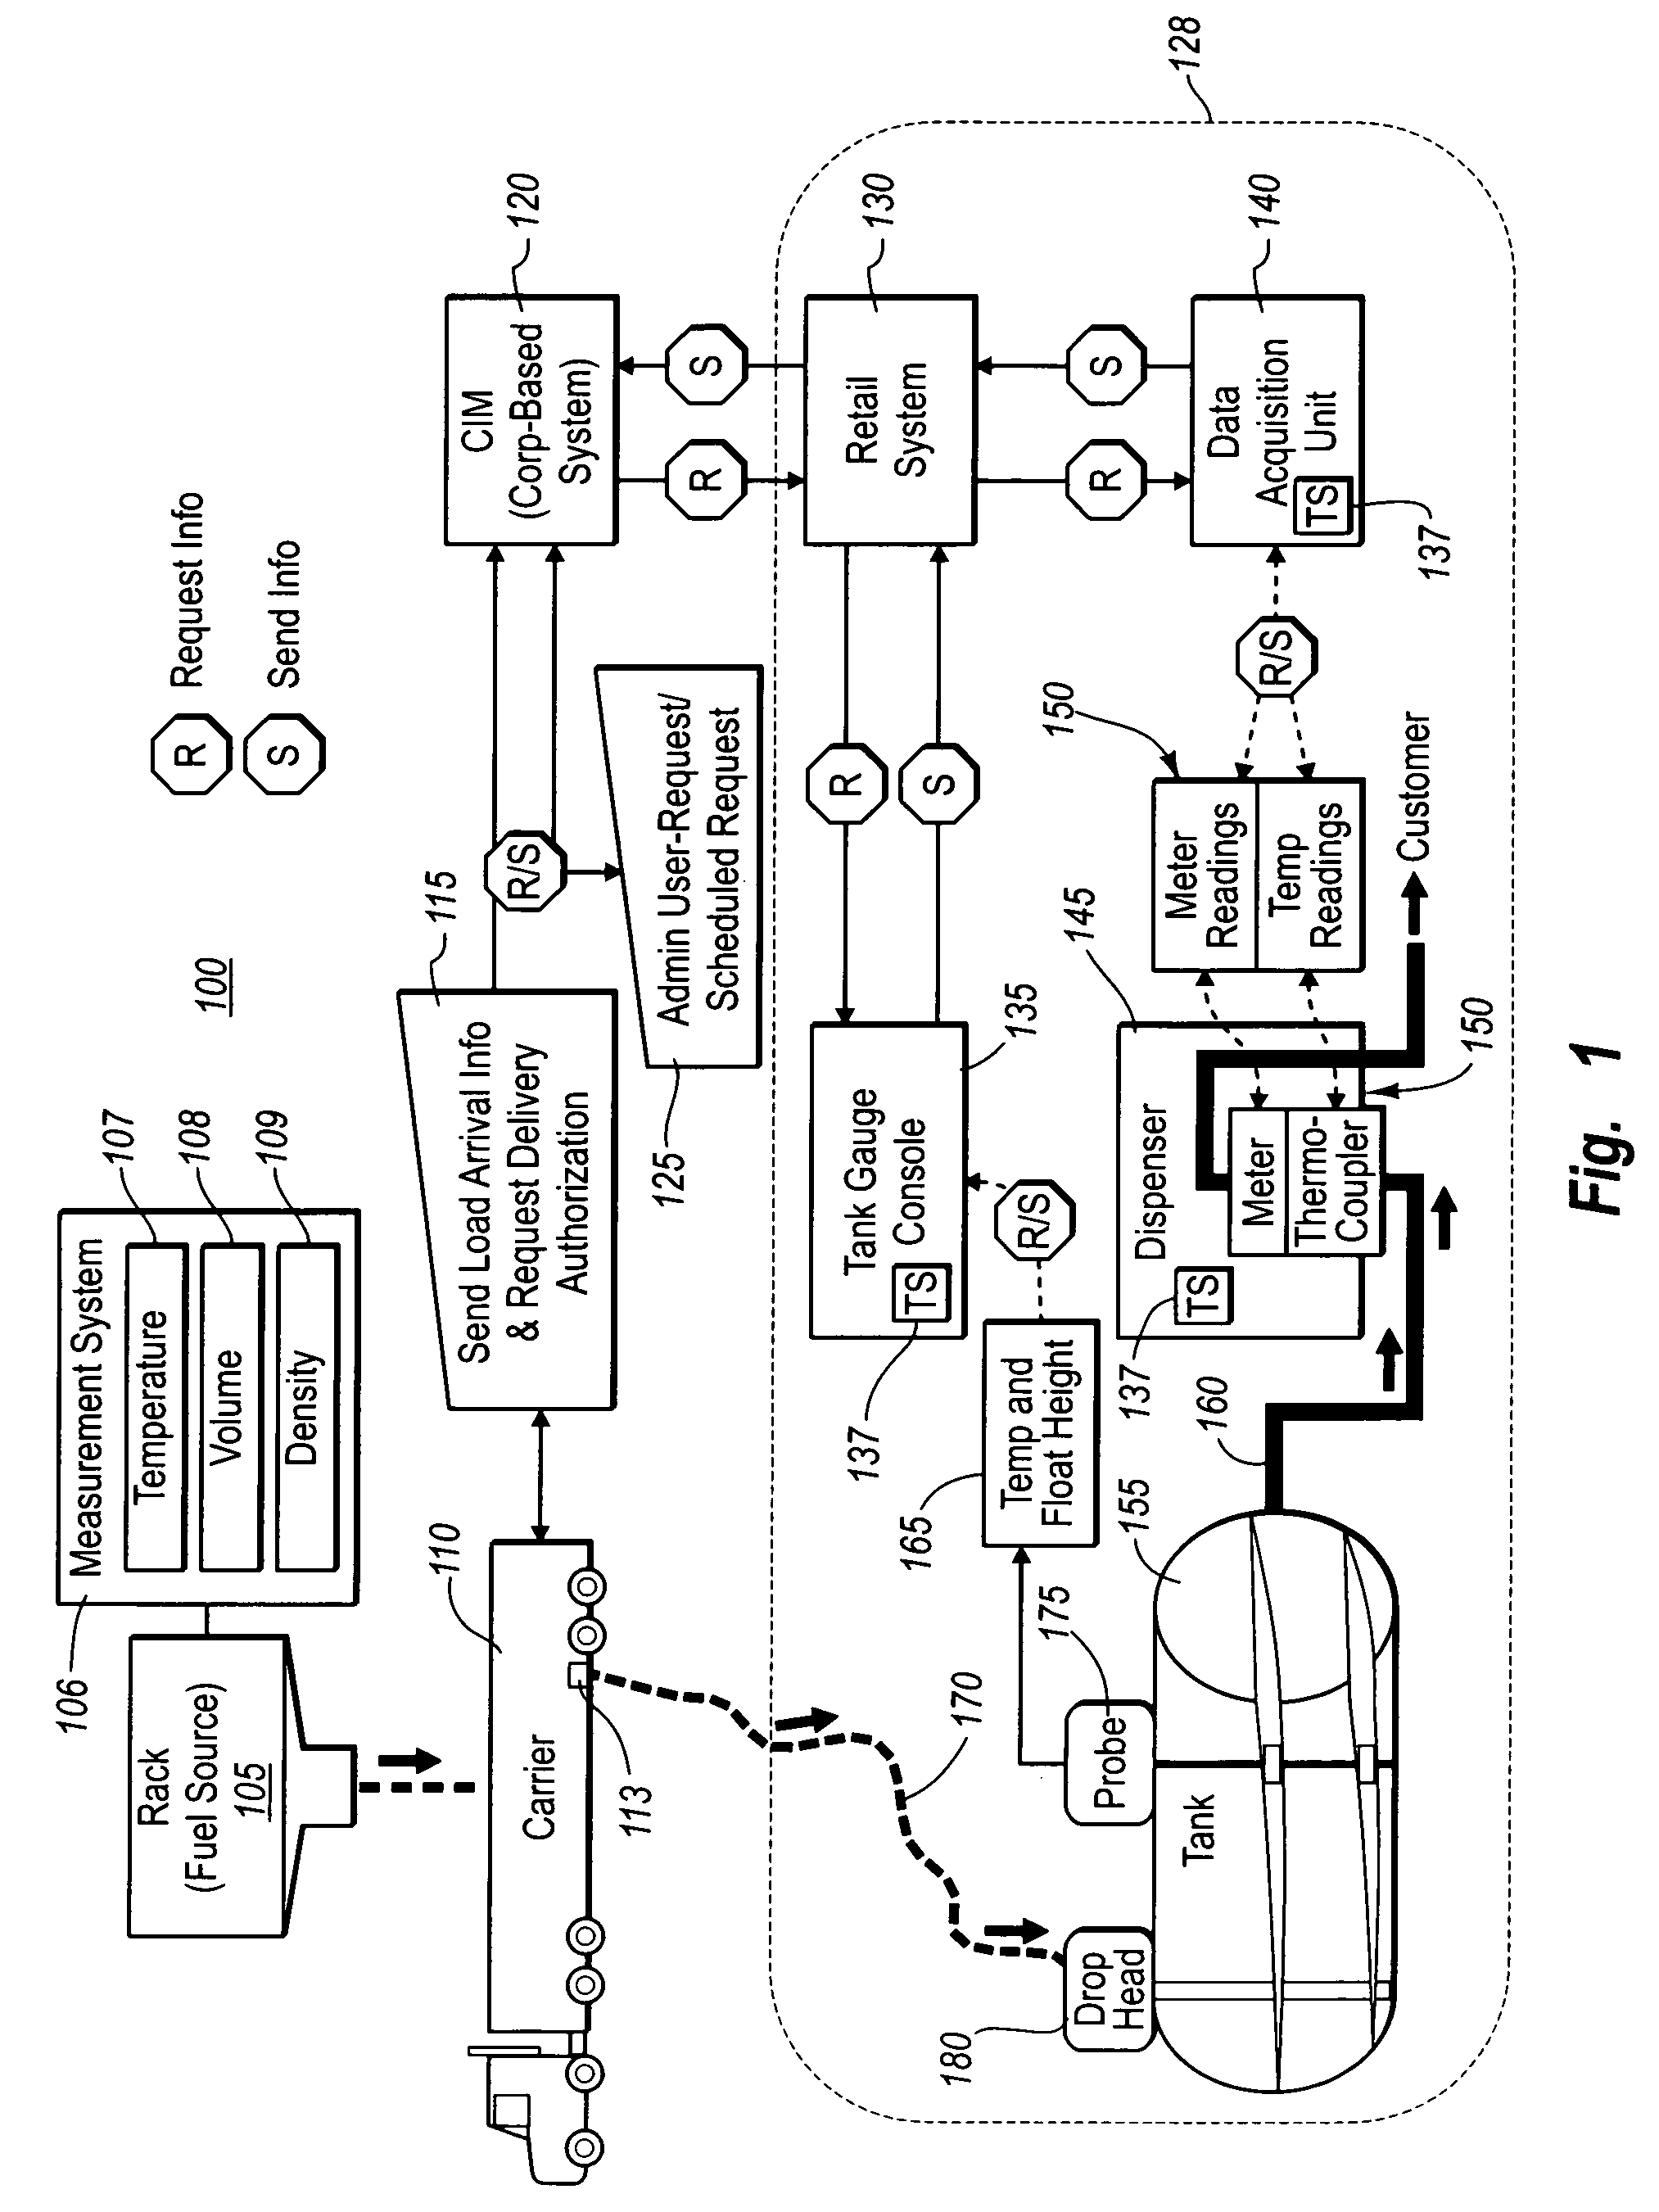 Performing an on-demand book balance to physical balance reconciliation process for liquid product